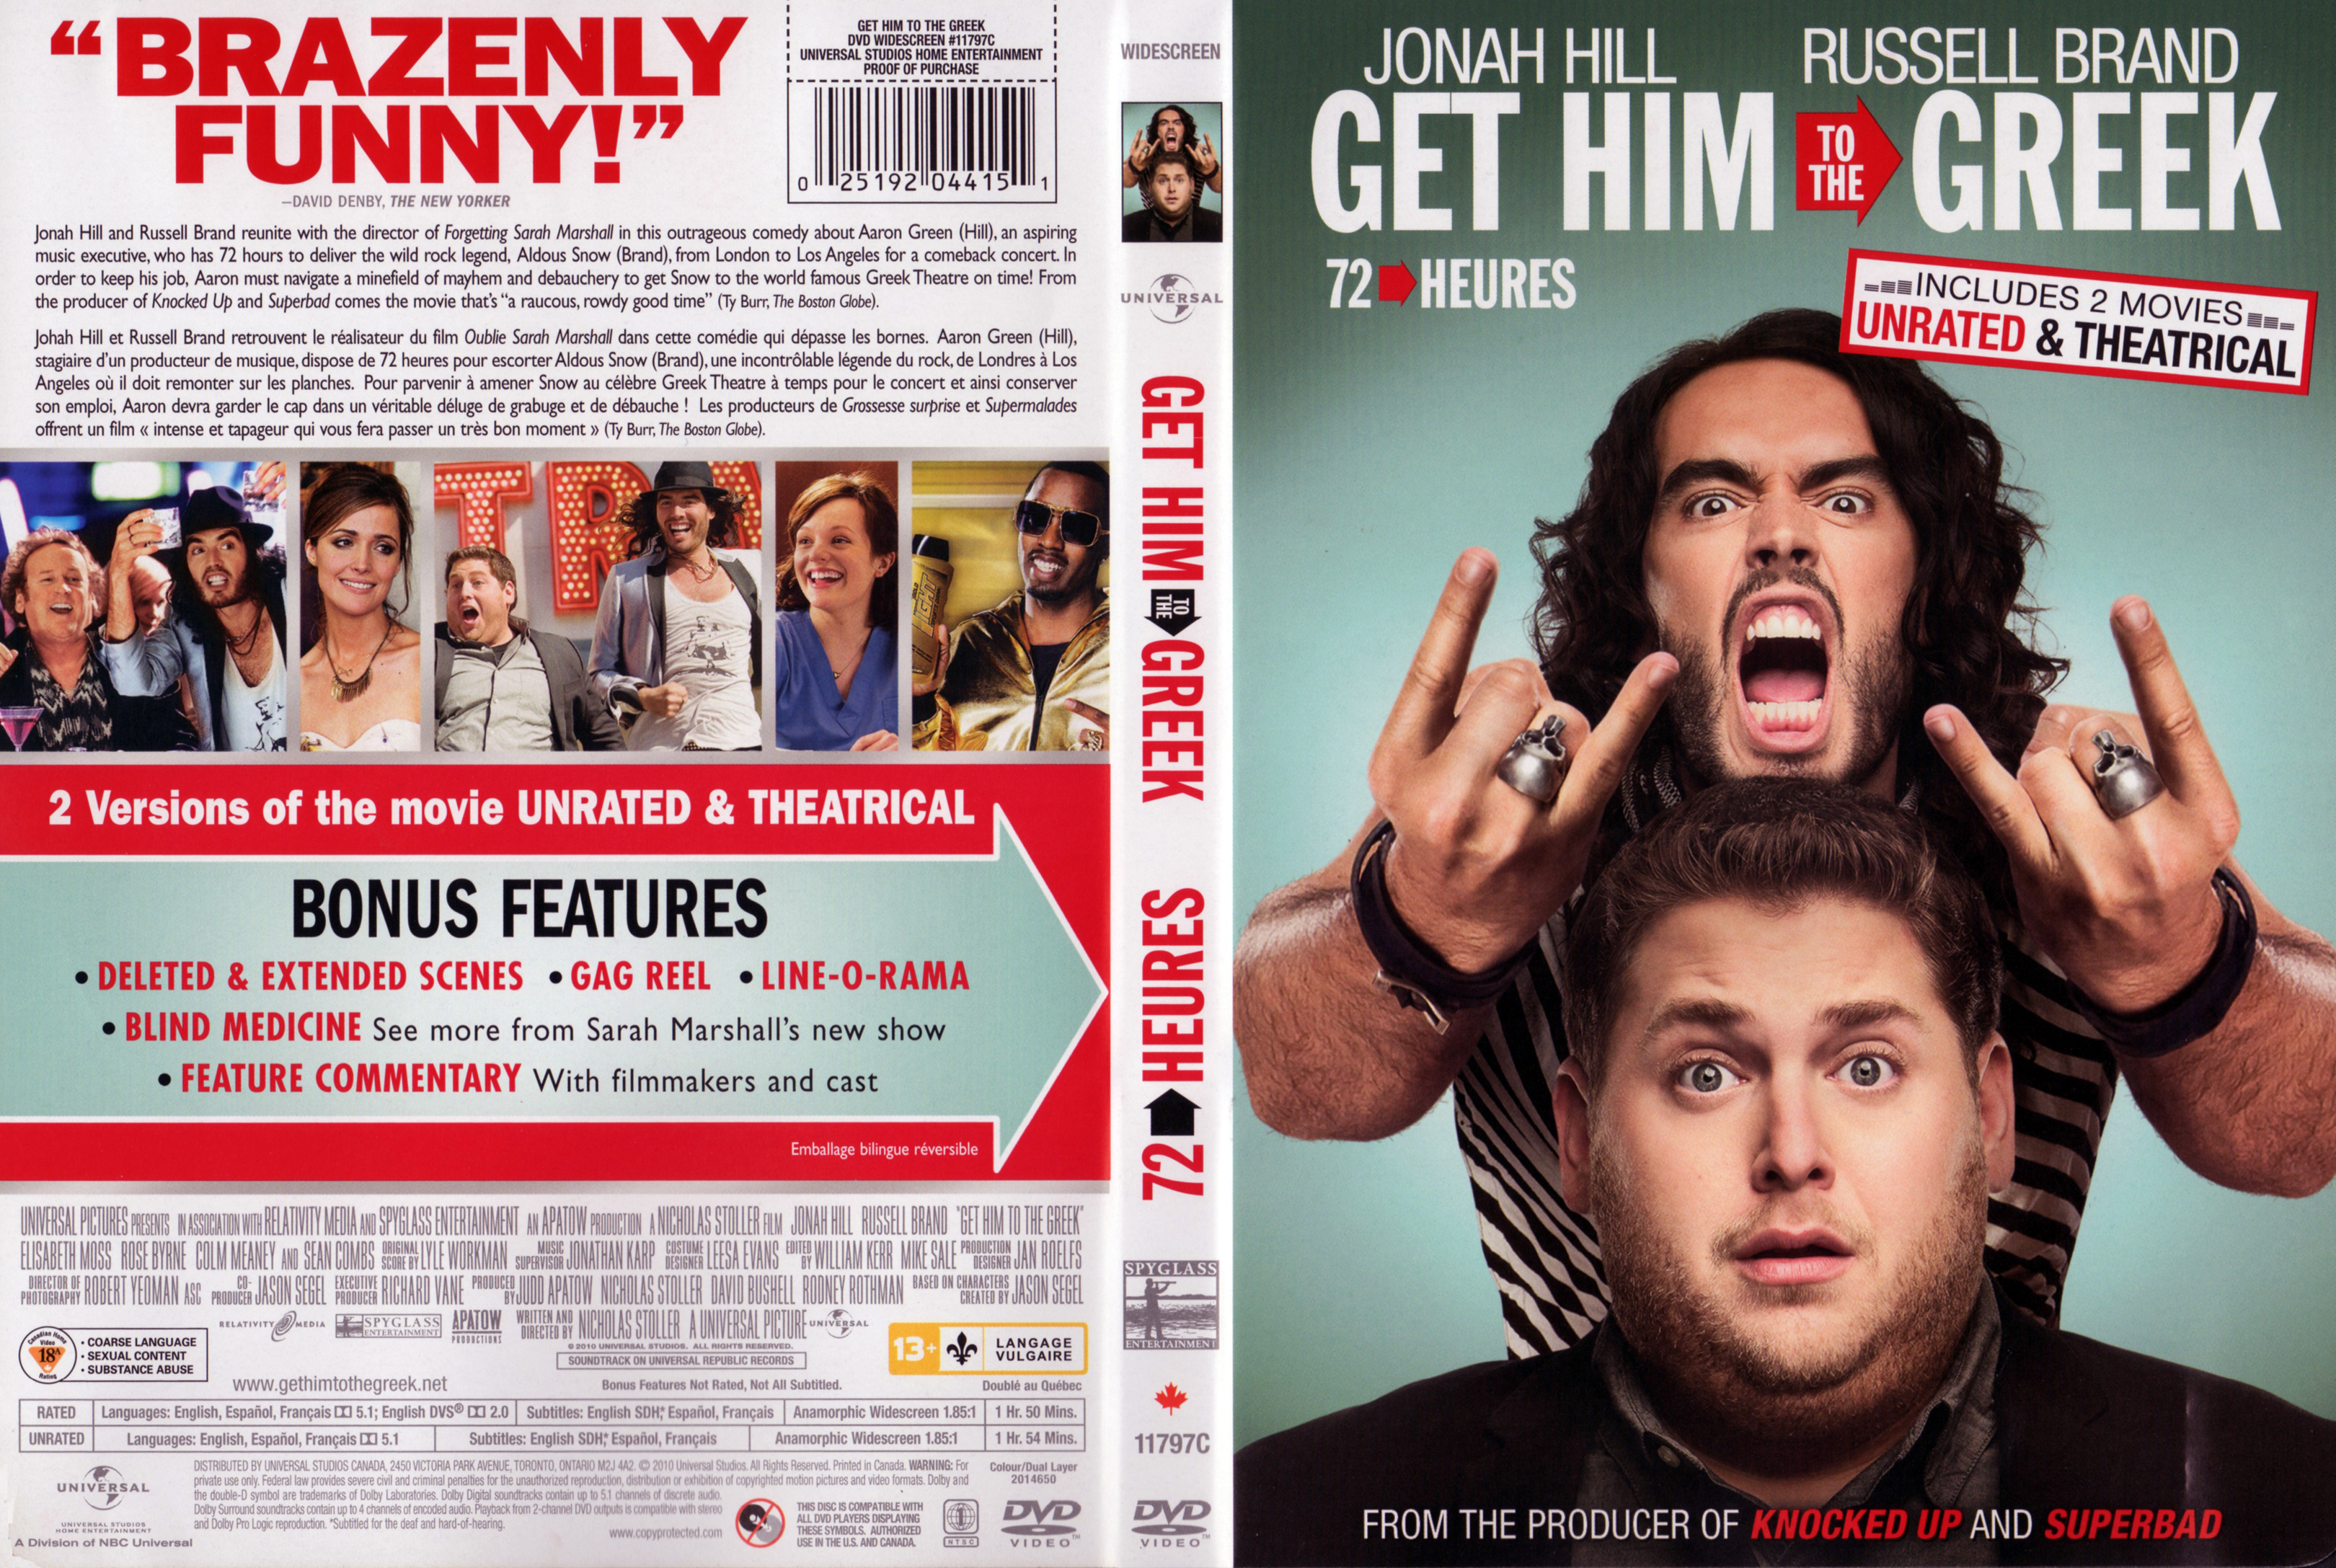 Jaquette DVD Get him to the greek - 72 heures (Canadienne)